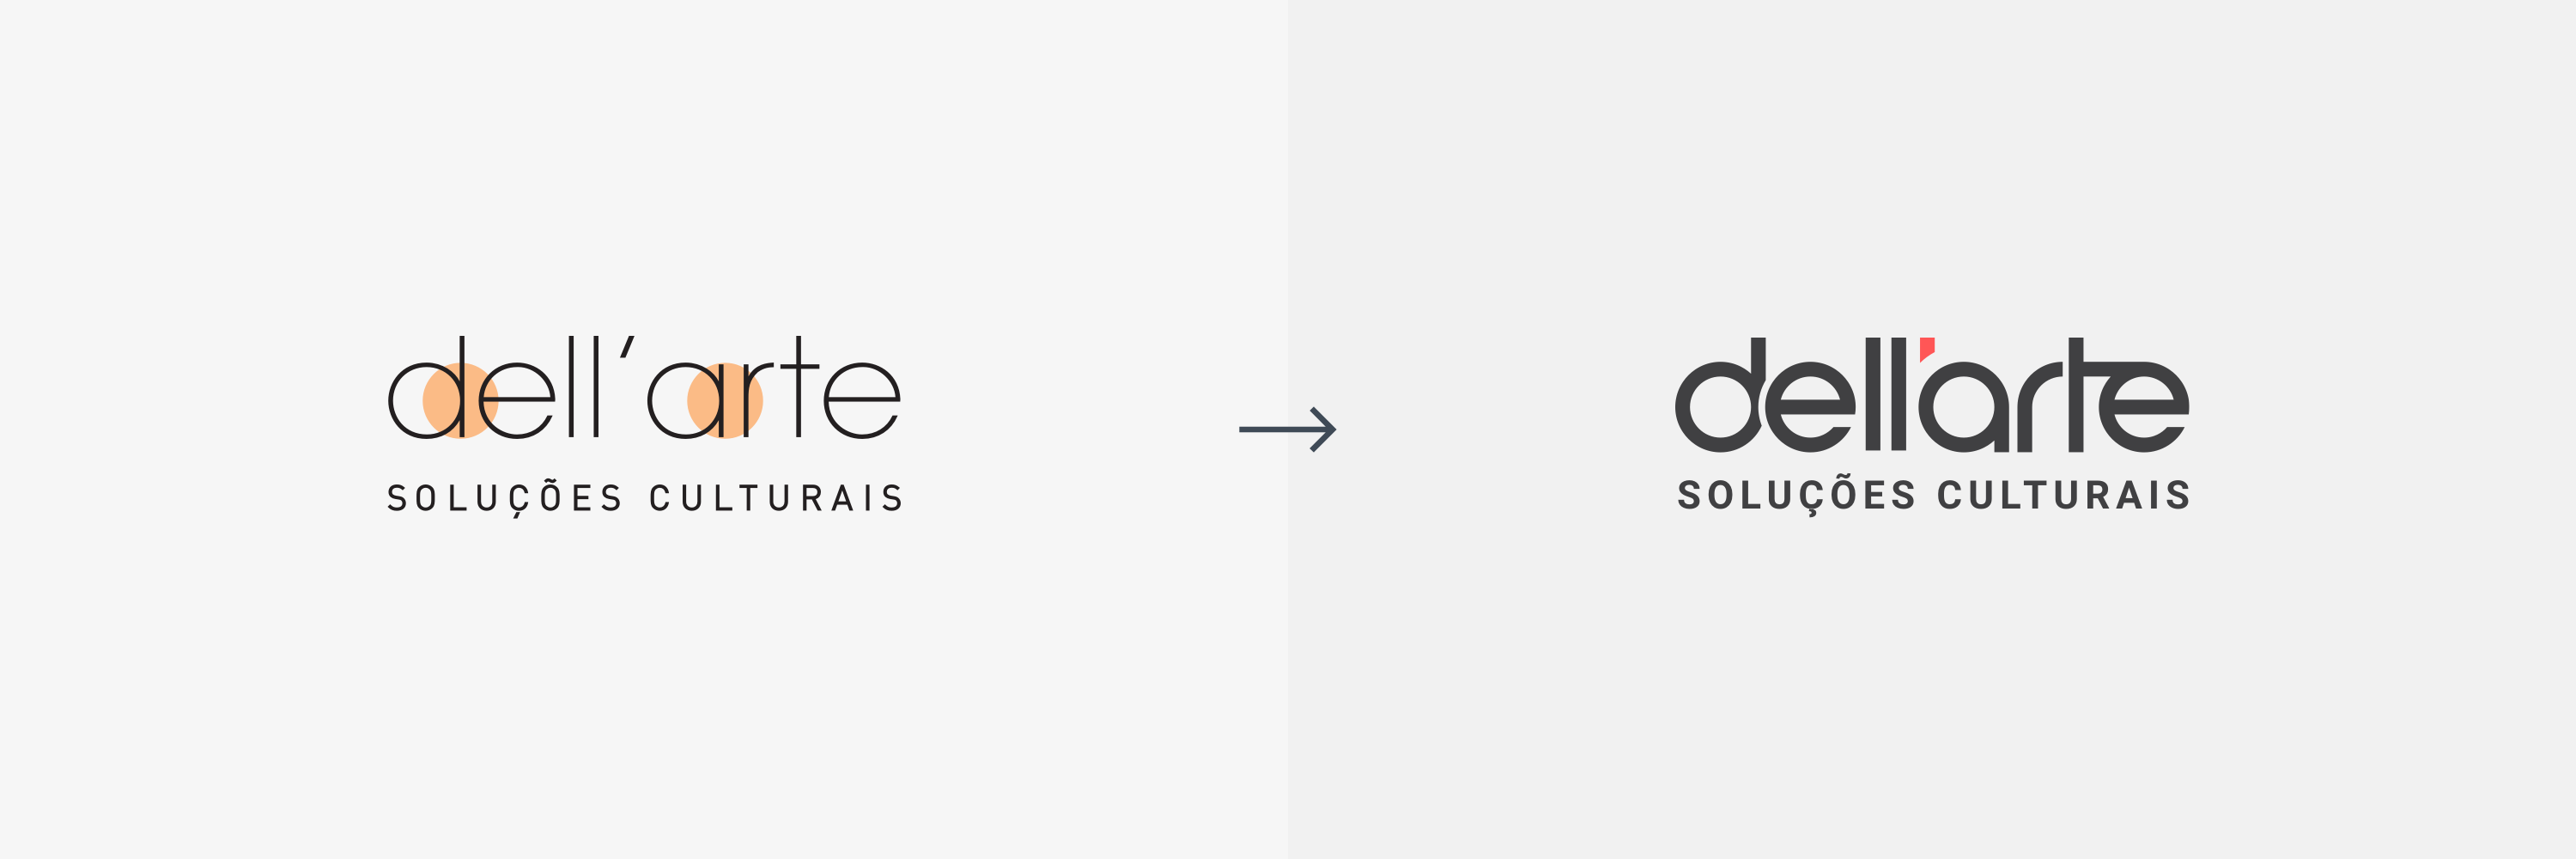 dellarte logo (before and after)